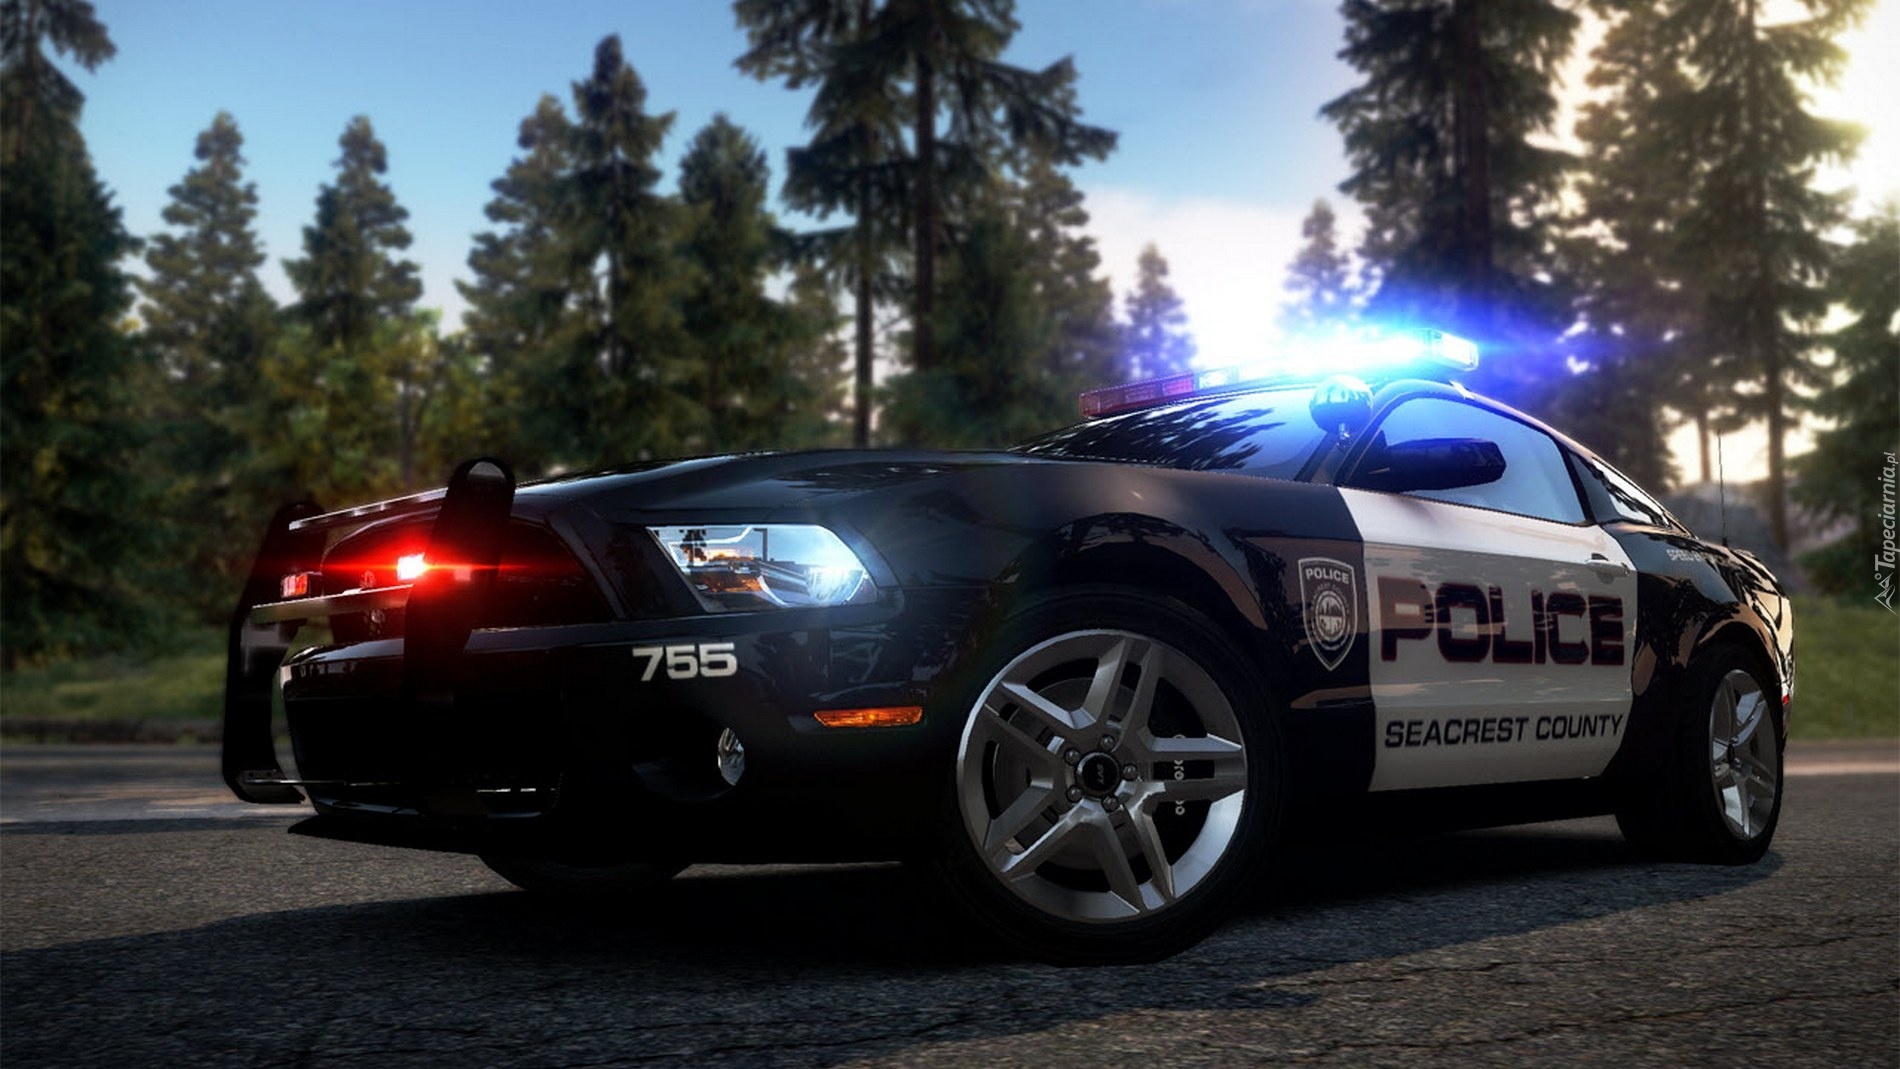 Нид фор спид хот персьют. Ford Shelby gt500 Police. Ford Mustang gt 500 Police NFS. Need for Speed hot Pursuit полиция. NFS hot Pursuit 2010.